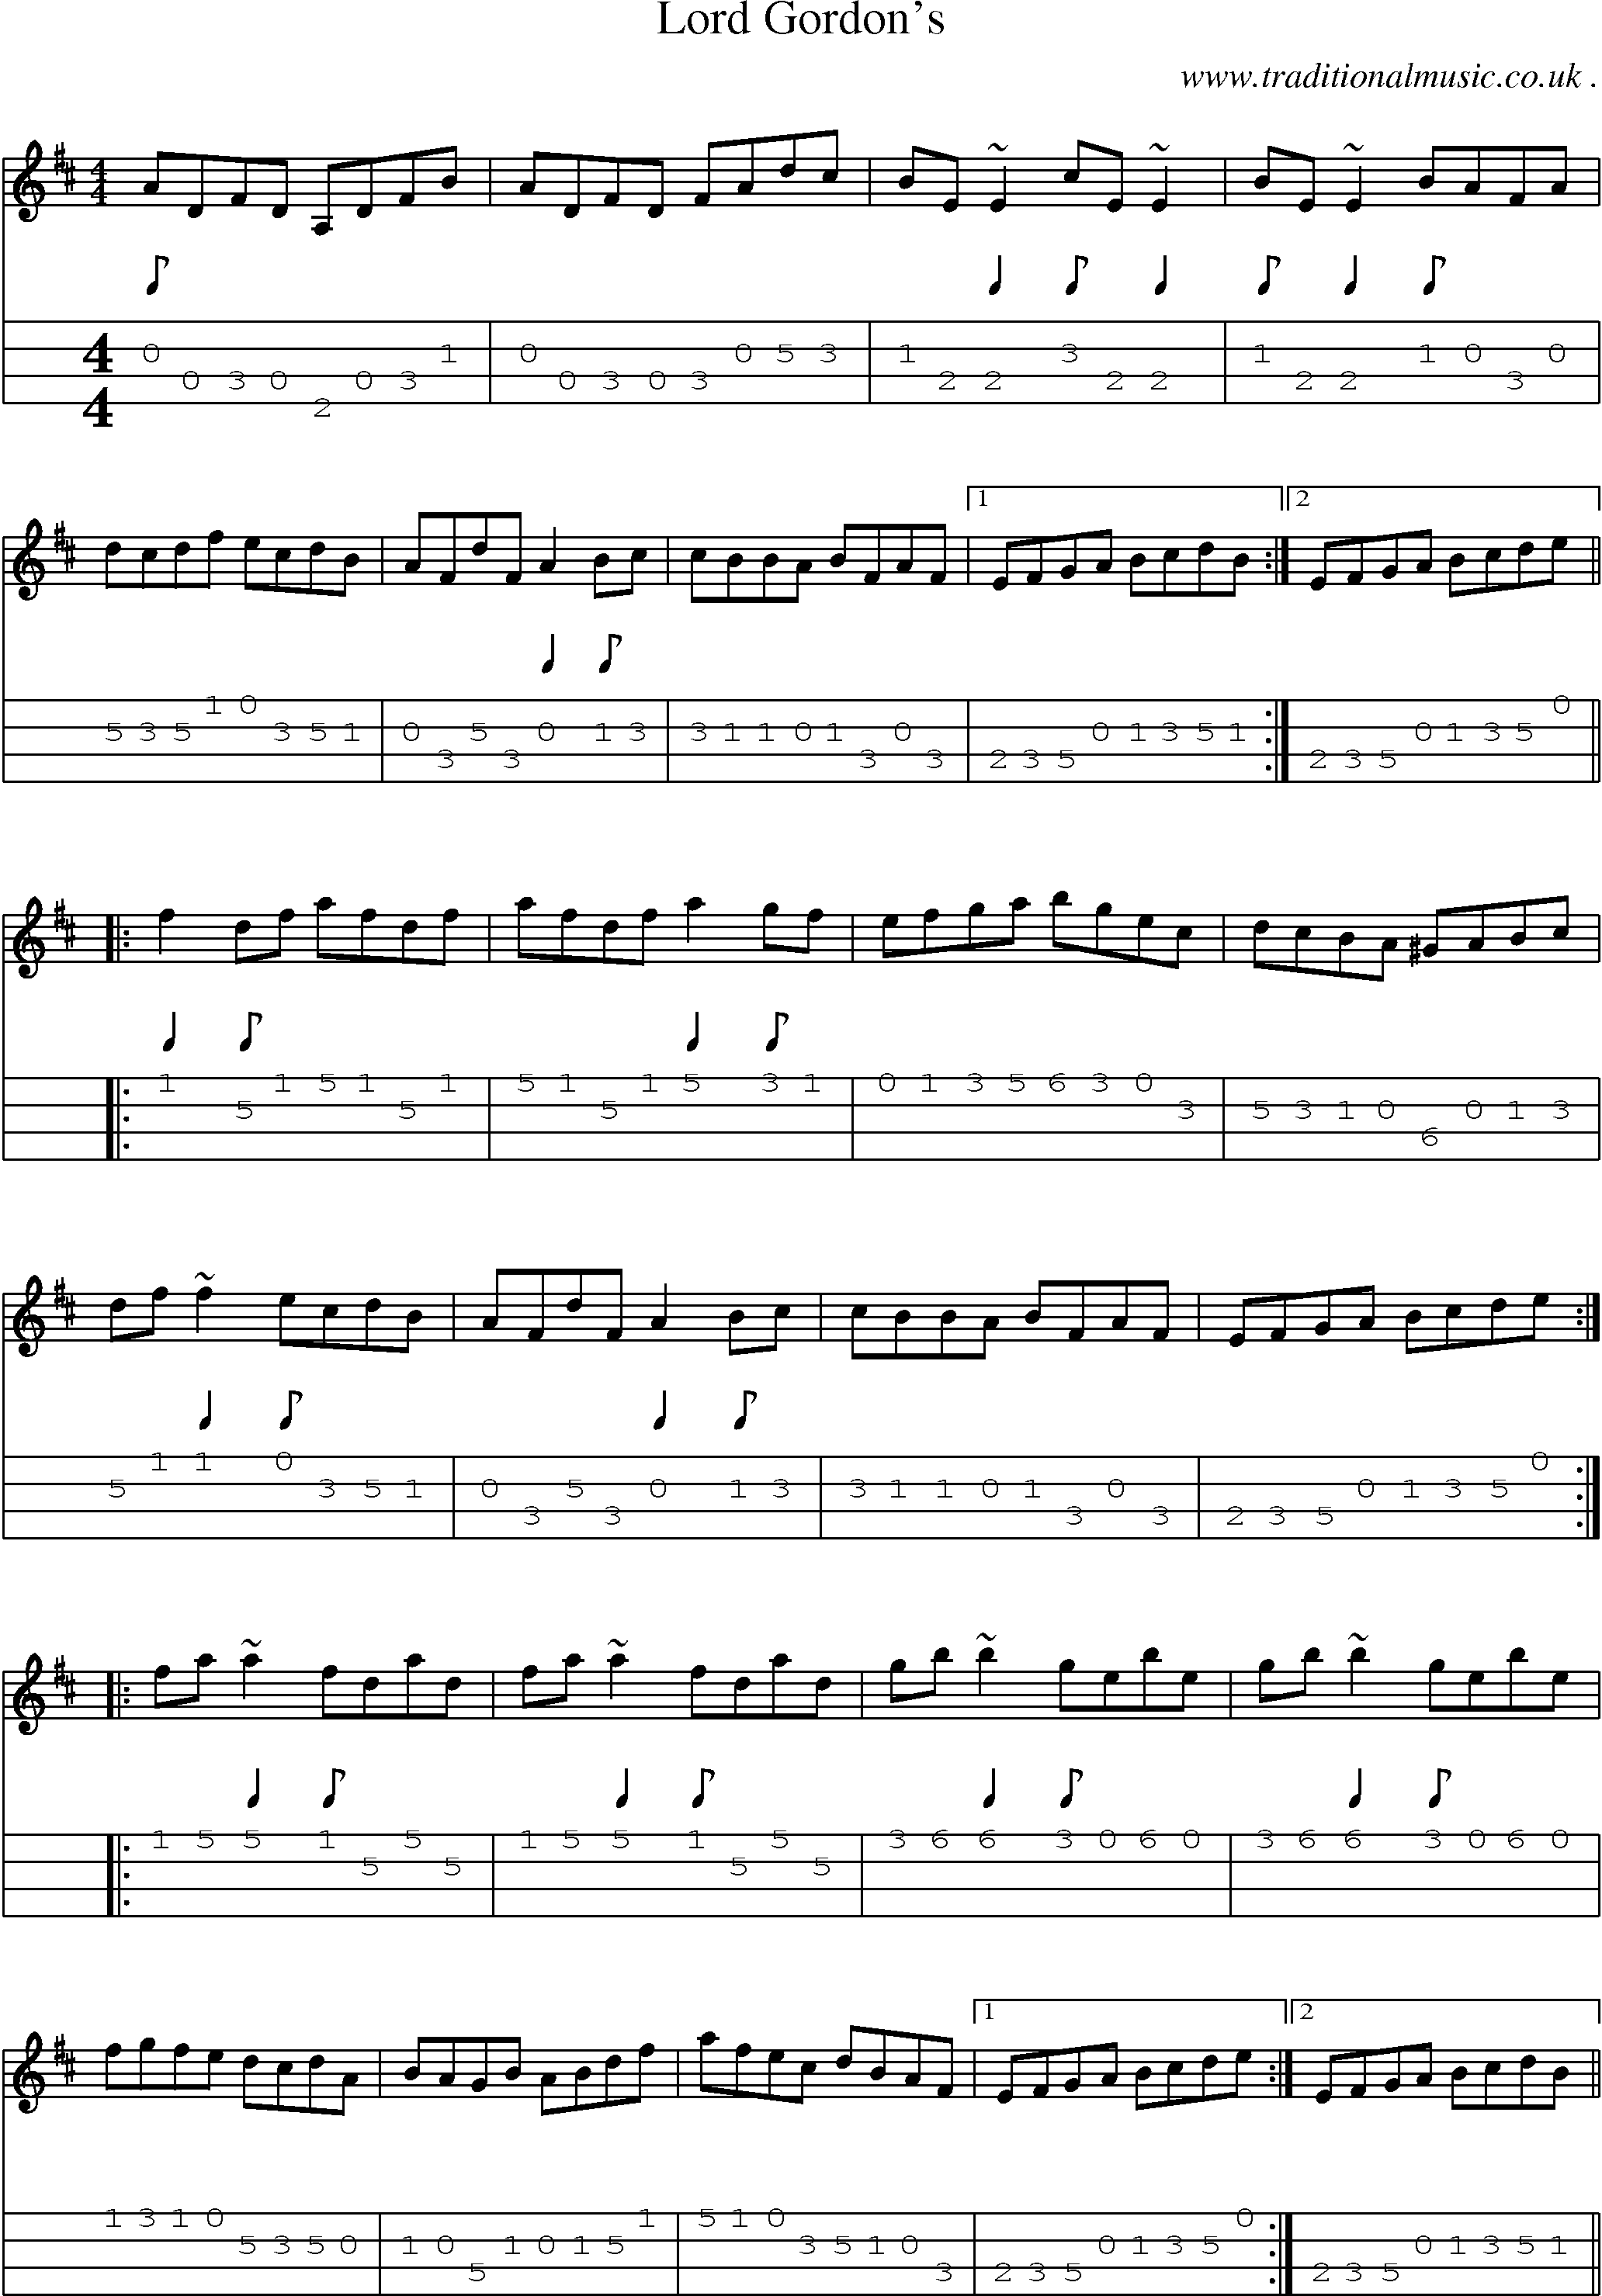 Sheet-music  score, Chords and Mandolin Tabs for Lord Gordons